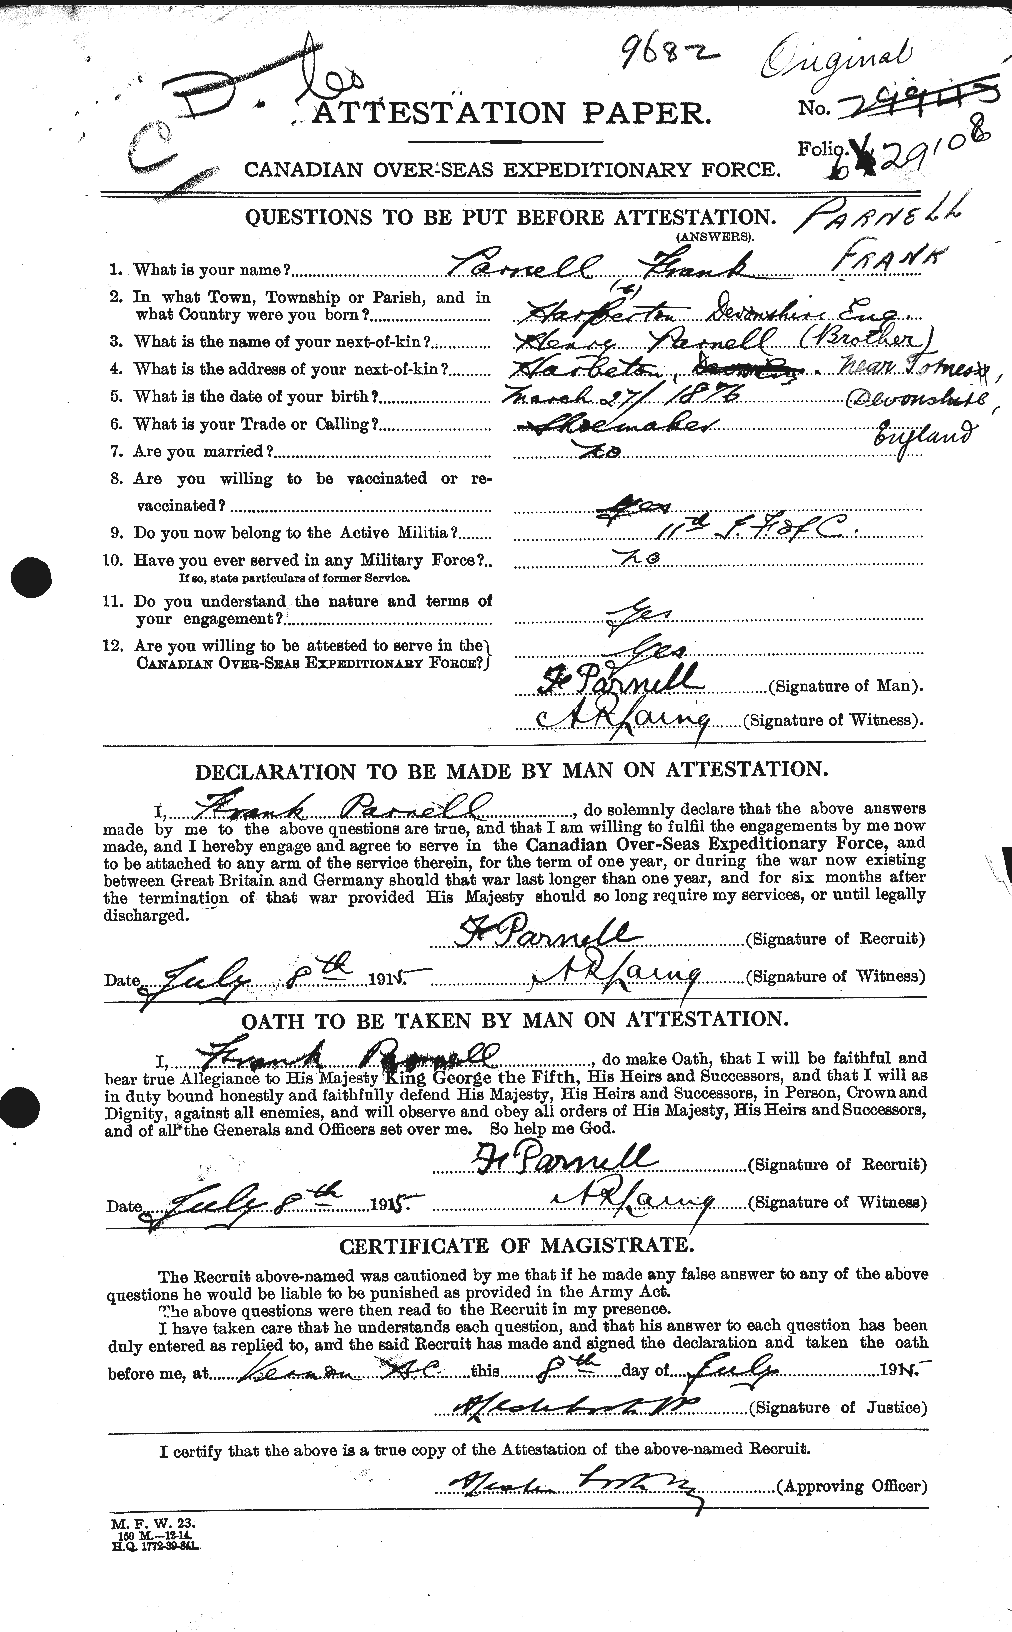 Personnel Records of the First World War - CEF 566345a